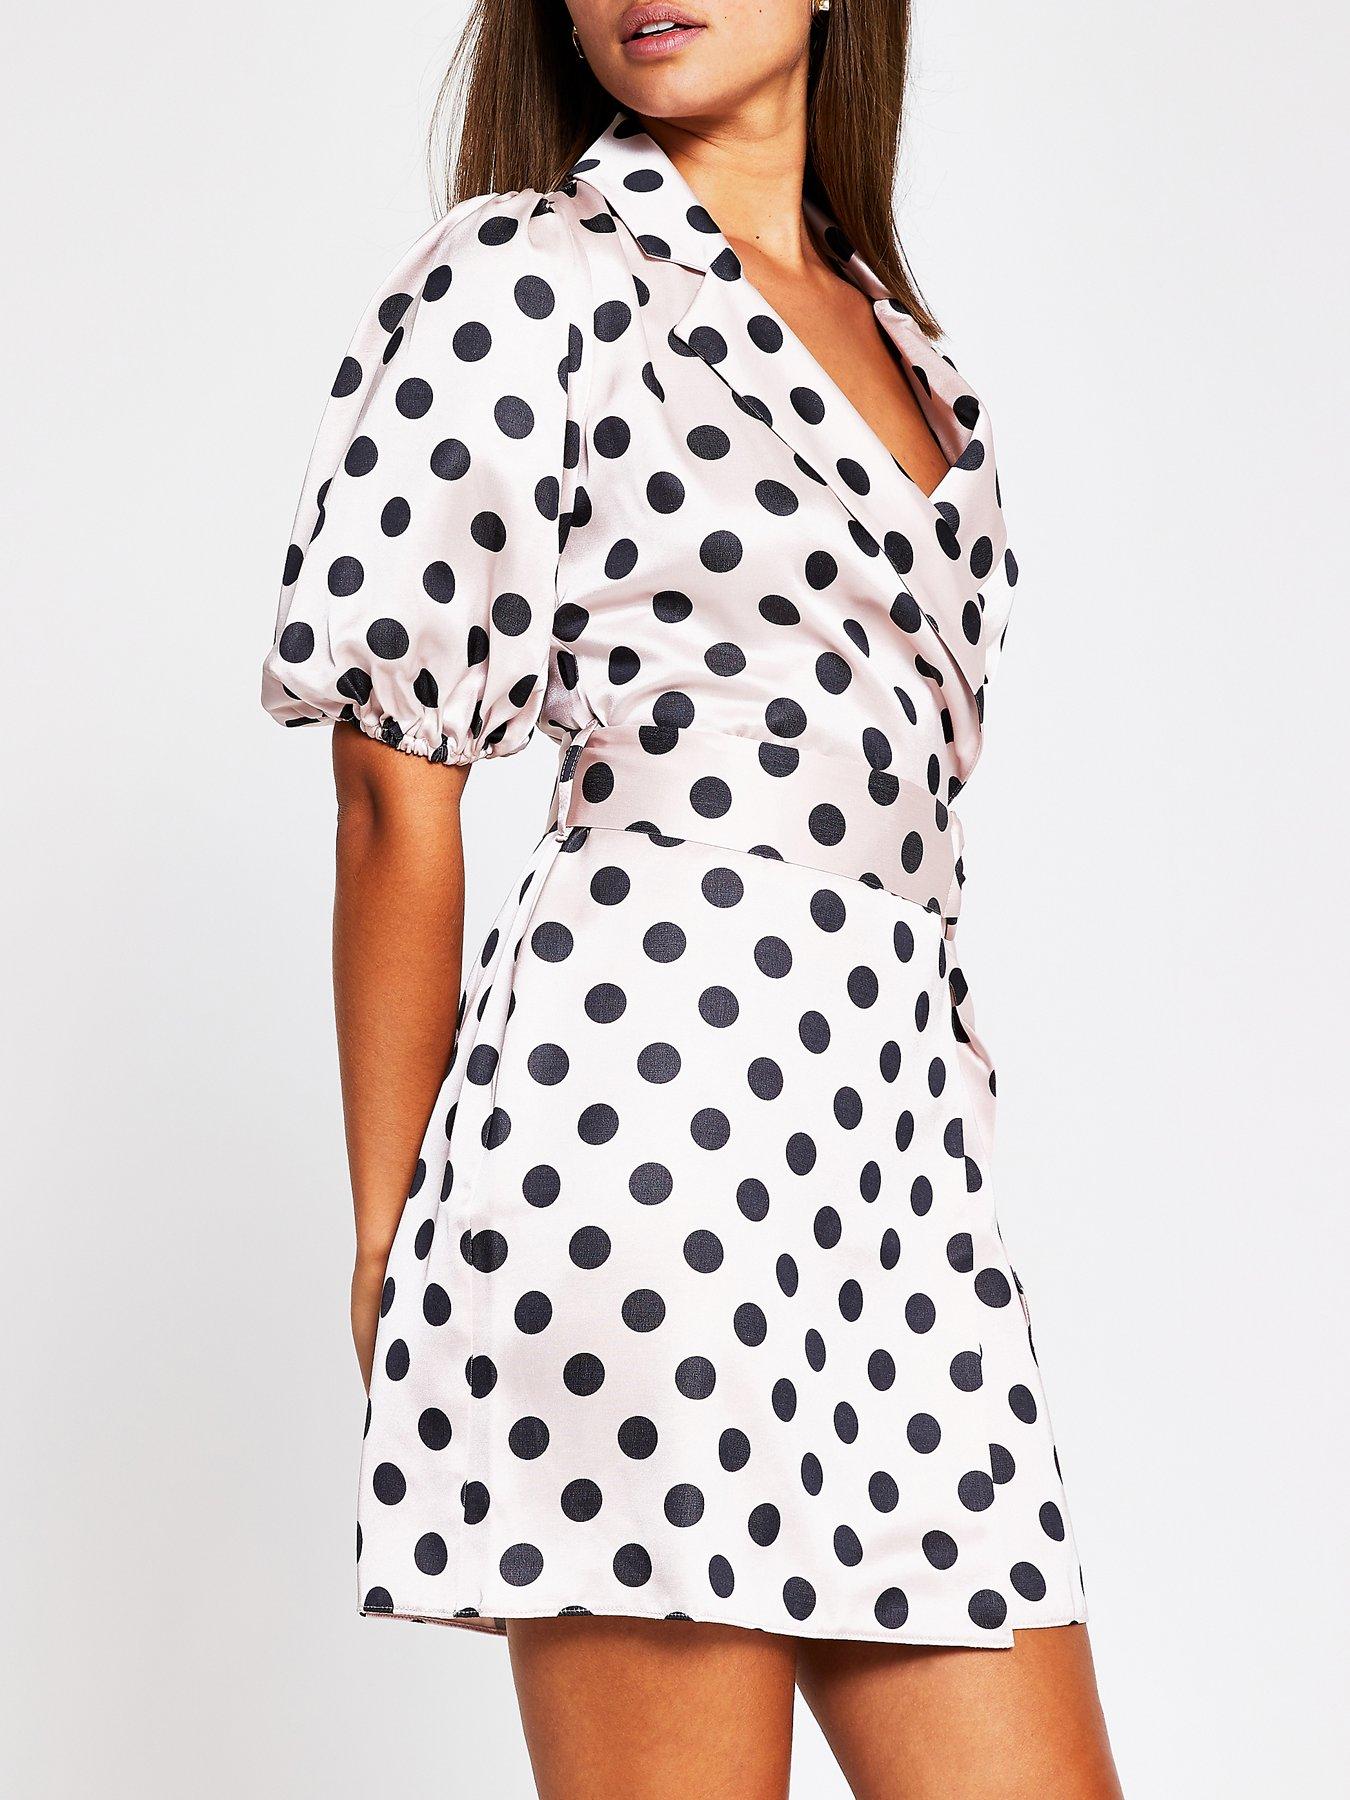 river island special occasion dresses